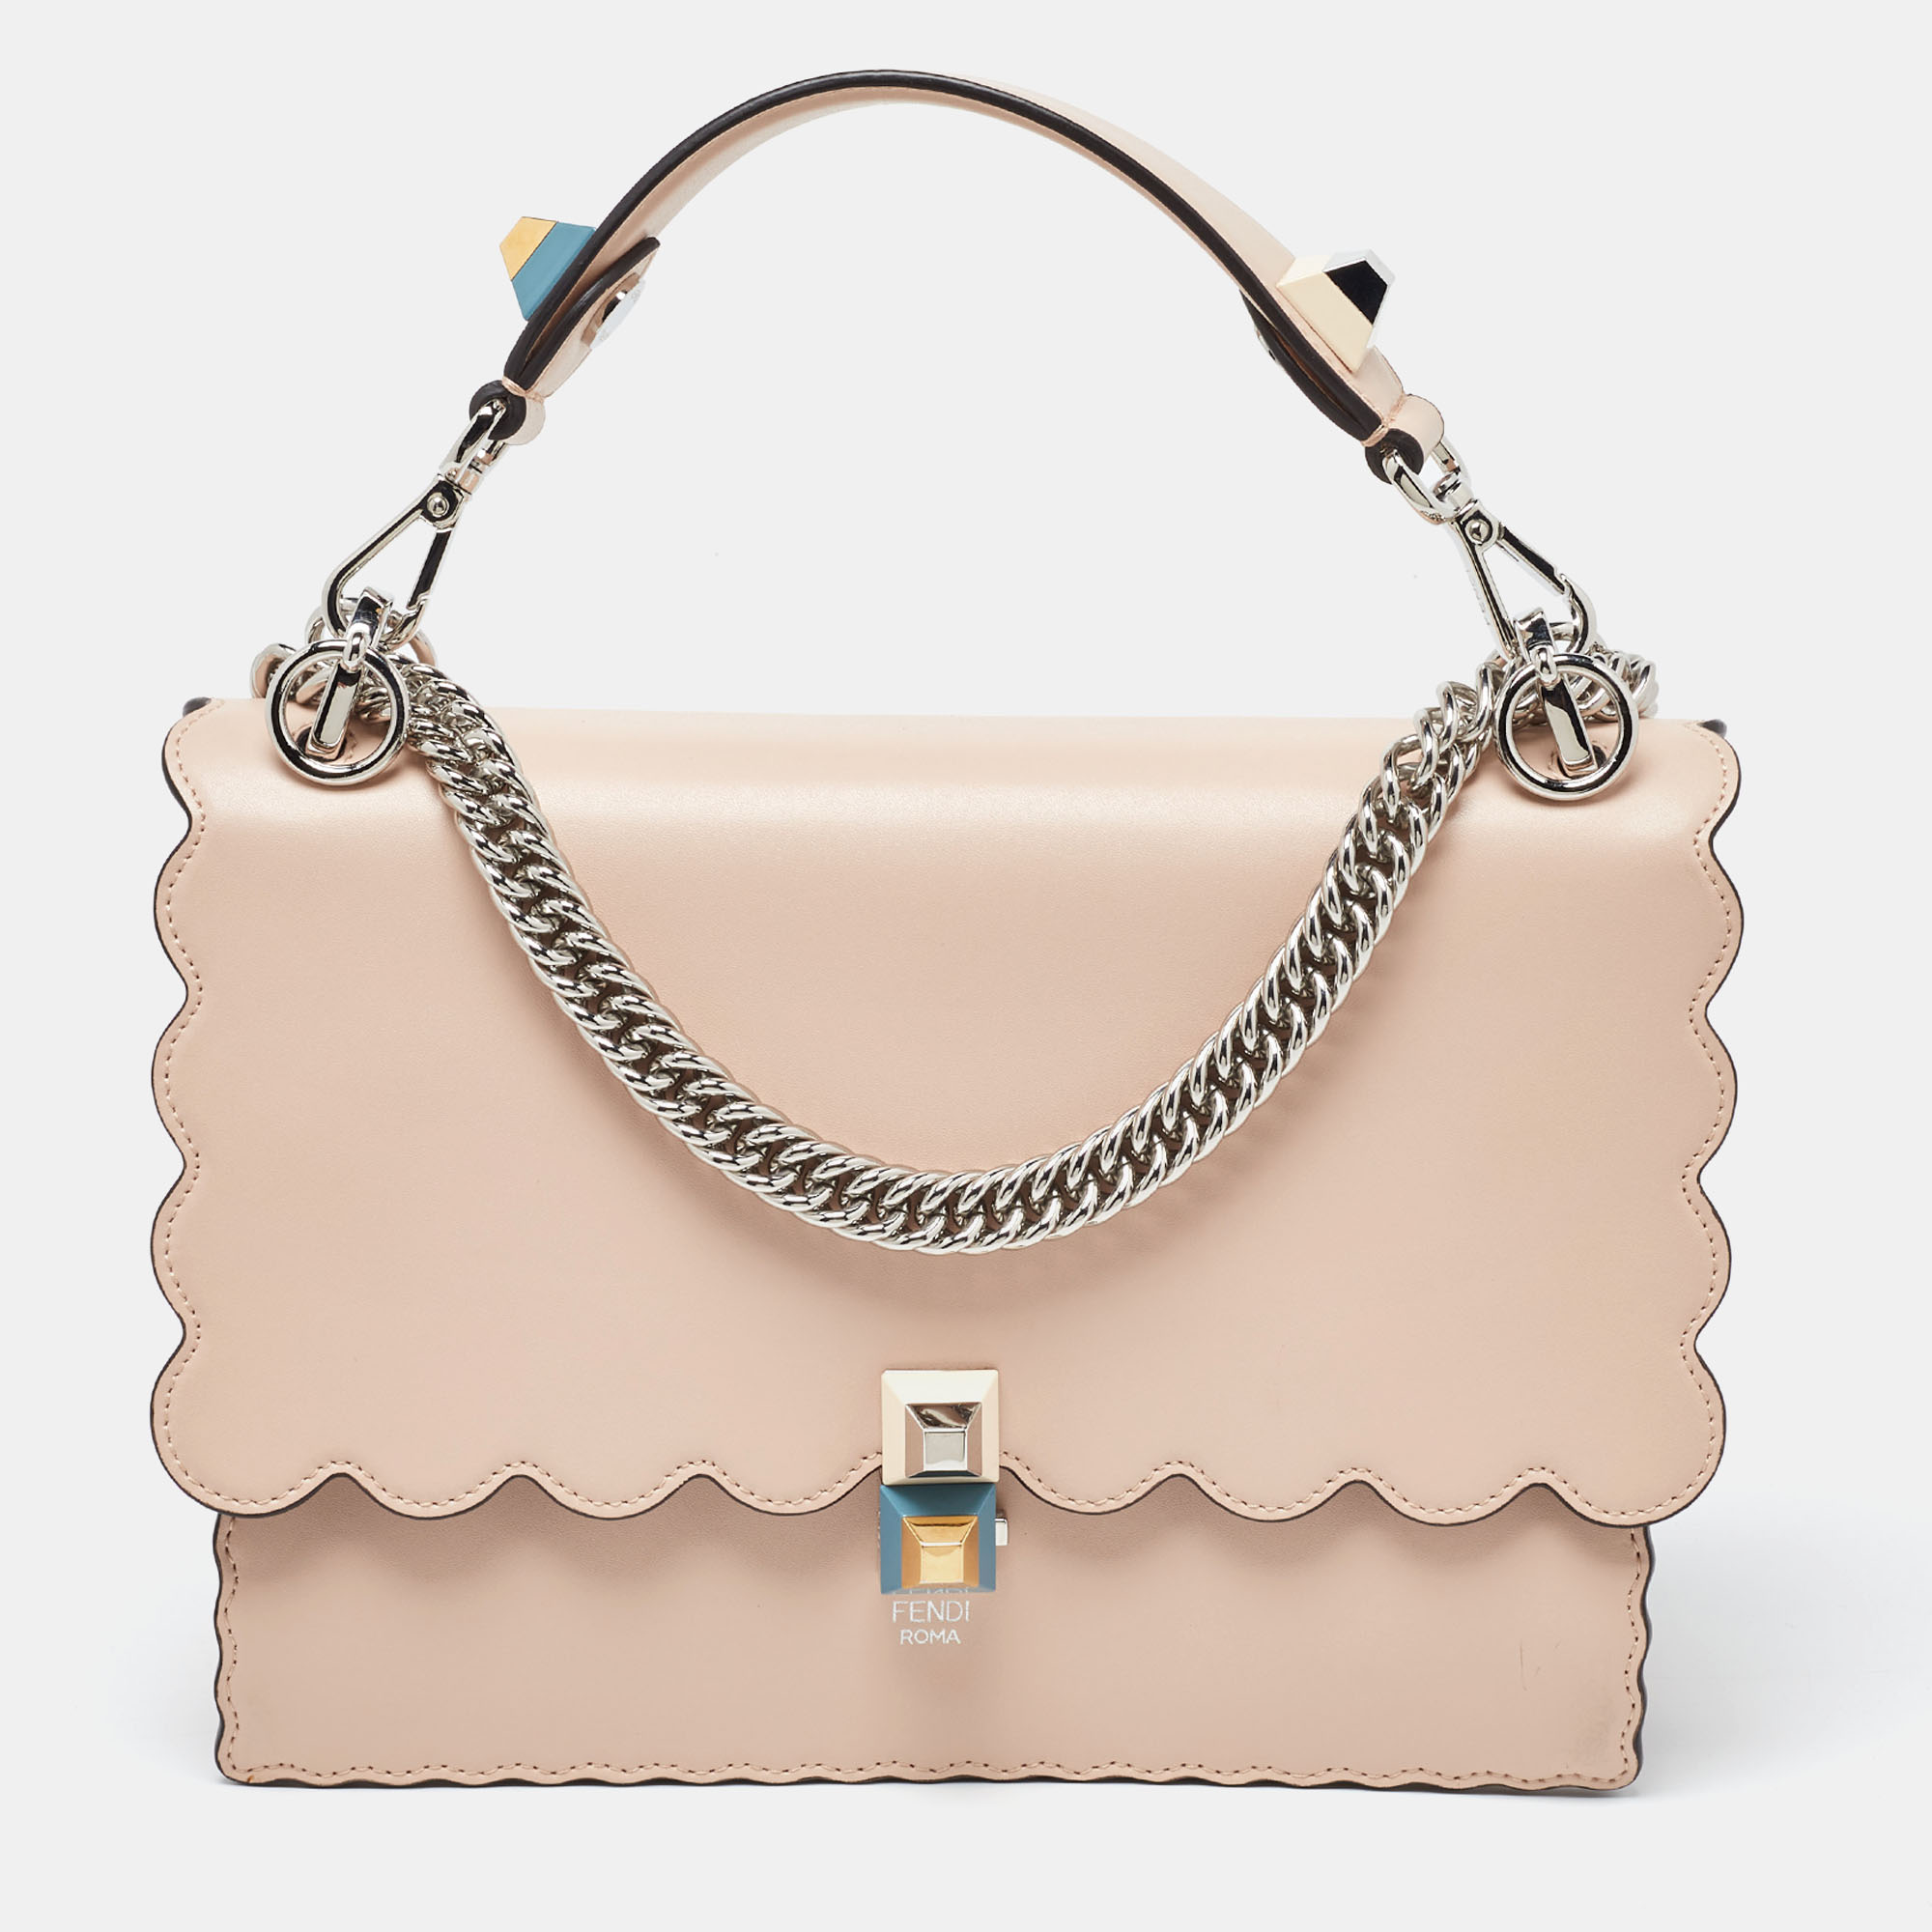 From the Resort 2017 collection the Fendi Kan I bag depicts fun style and alluring appeal. This classic creation is a true piece of art with its striking scalloped trims and faultless craftsmanship. Created from leather its short handle at the top is decorated with beautiful motifs and it also flaunts a chain leather shoulder strap. The bag is stunning with a jewel fastening closure on the front and its suede lined interior will house your valuables comfortably.